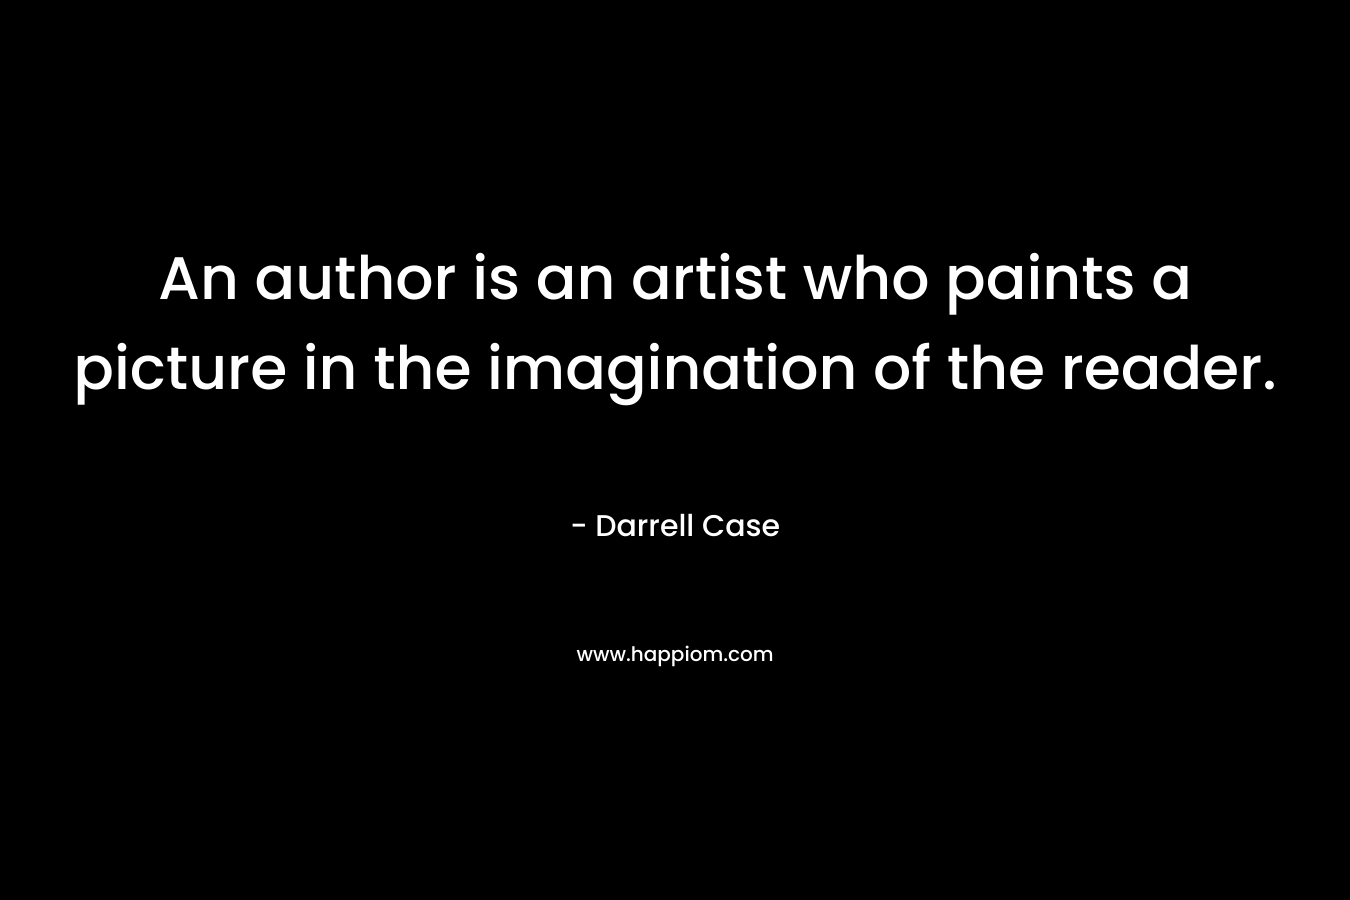 An author is an artist who paints a picture in the imagination of the reader. – Darrell Case